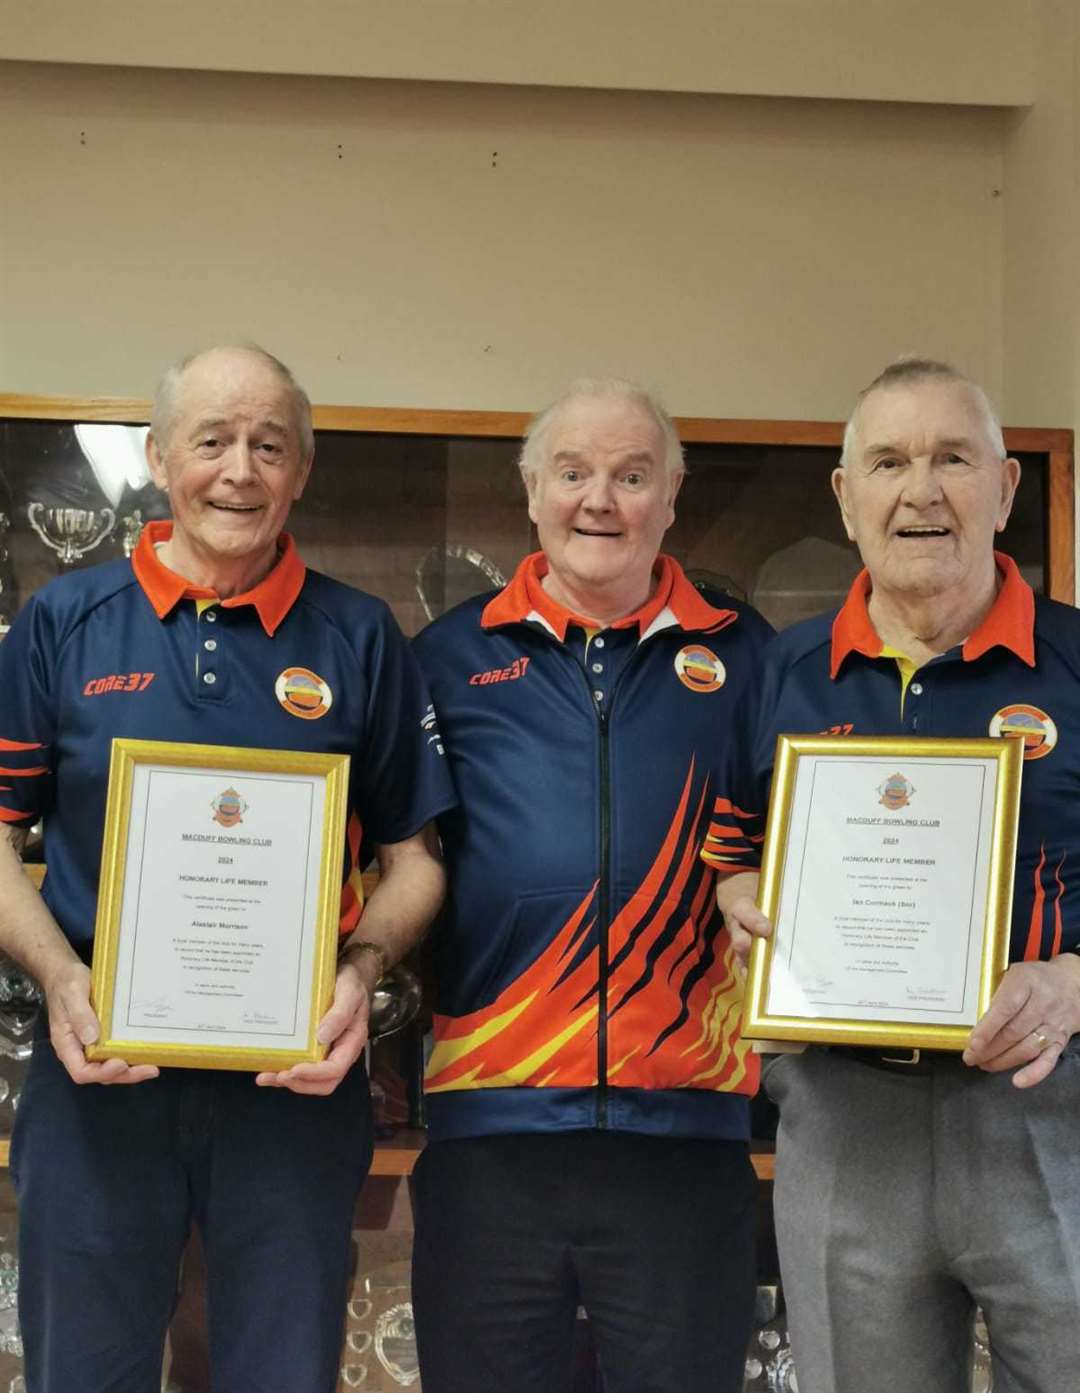 Honorary life memberships were presented to Alastair Morrison and Ian Cormack senior.